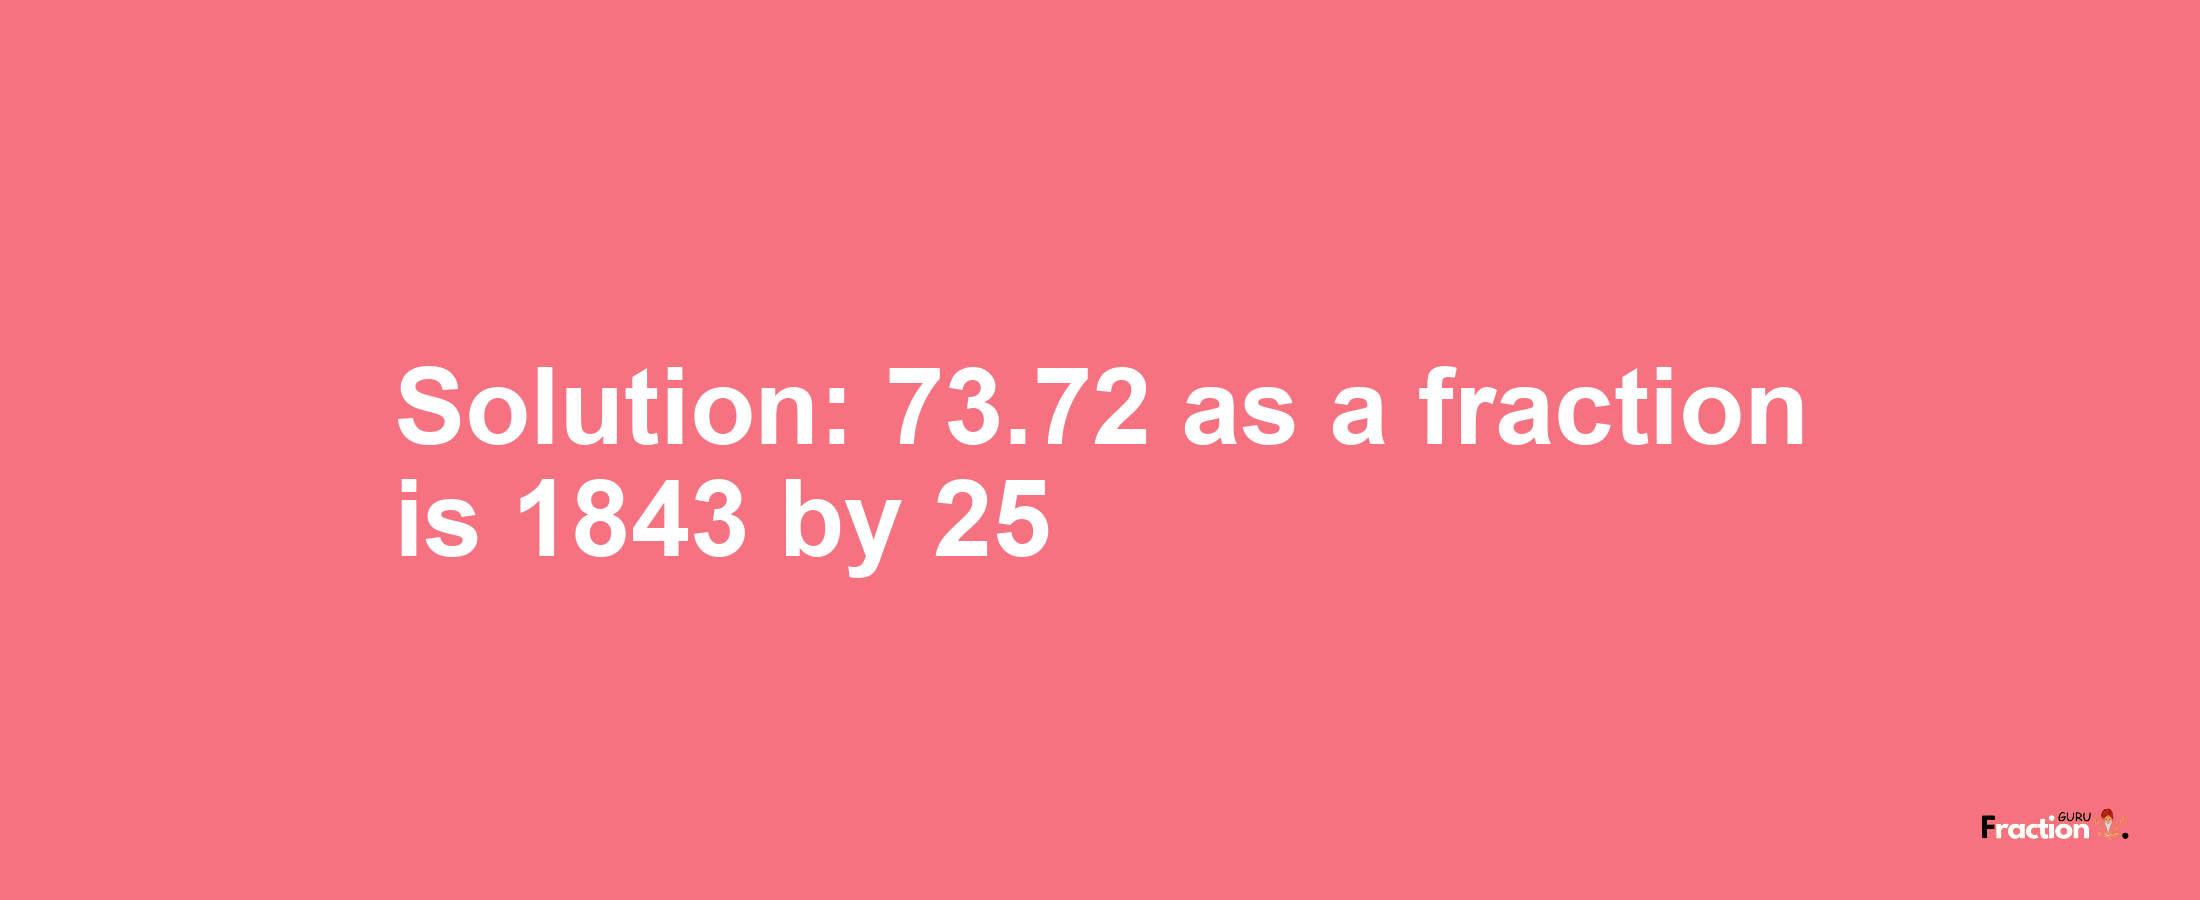 Solution:73.72 as a fraction is 1843/25